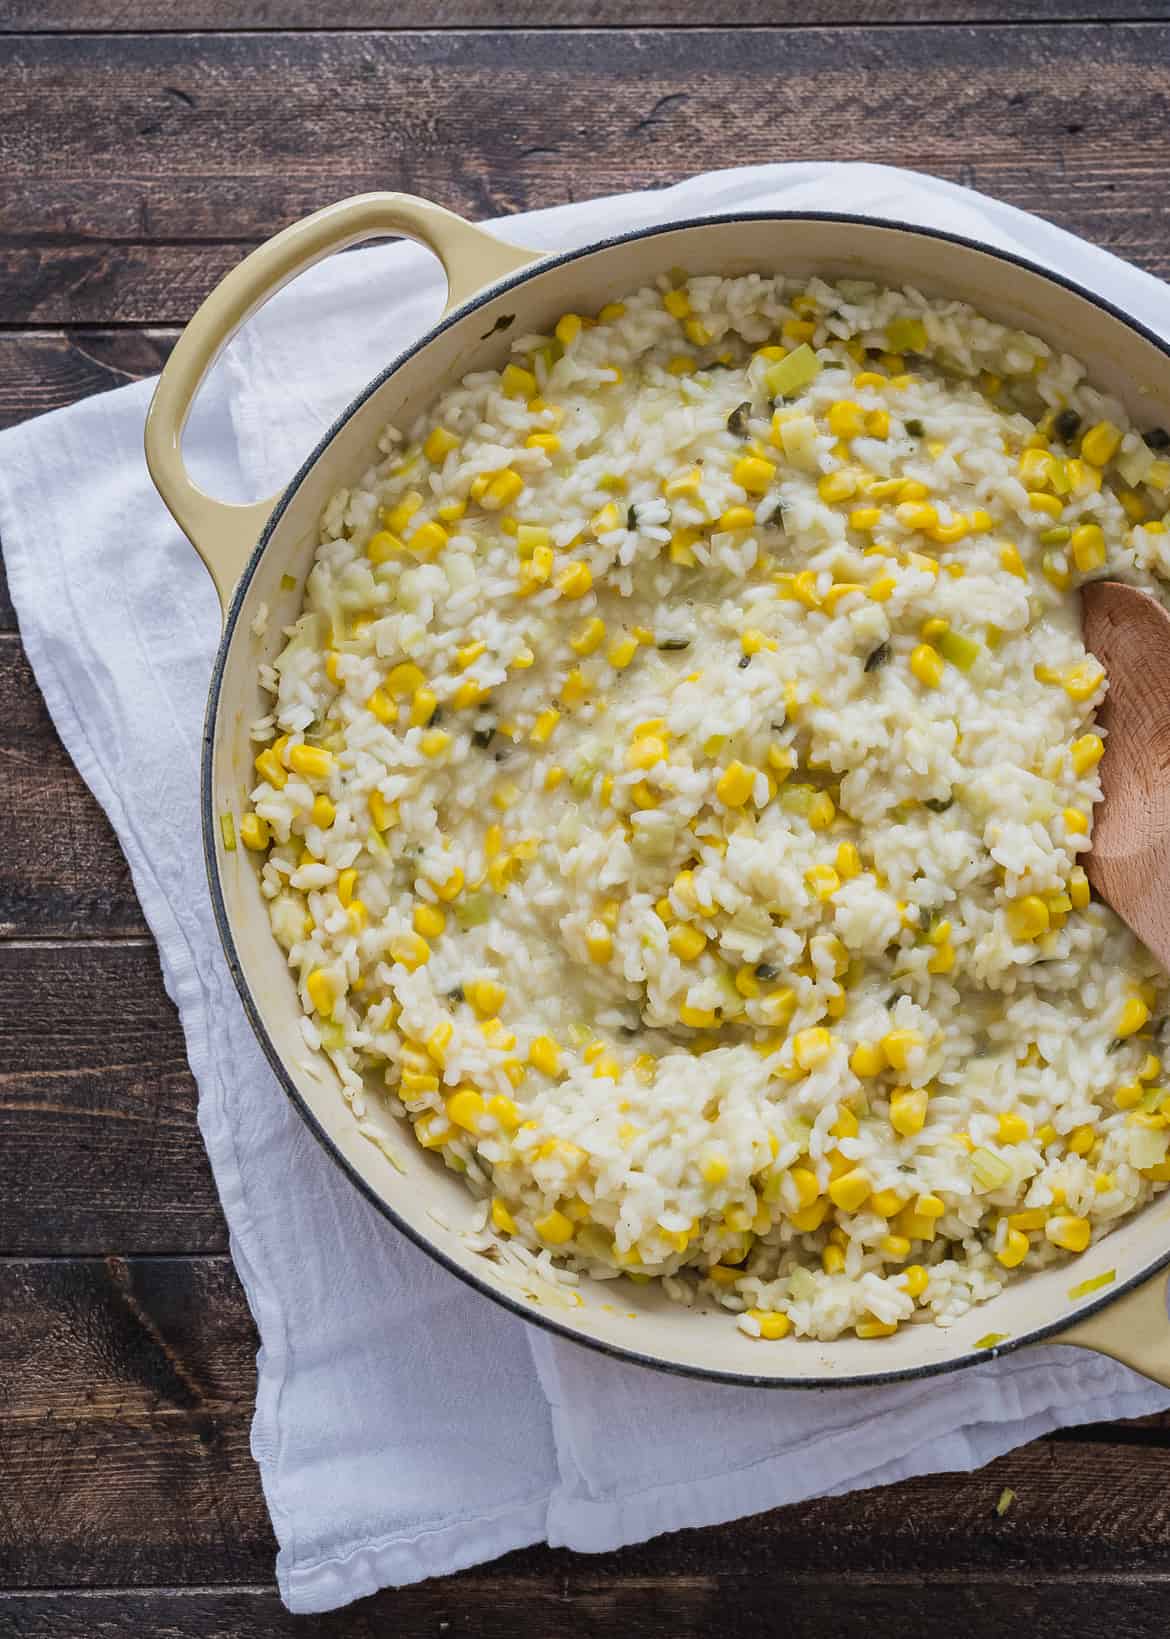 A Dutch oven filled with a creamy risotto.